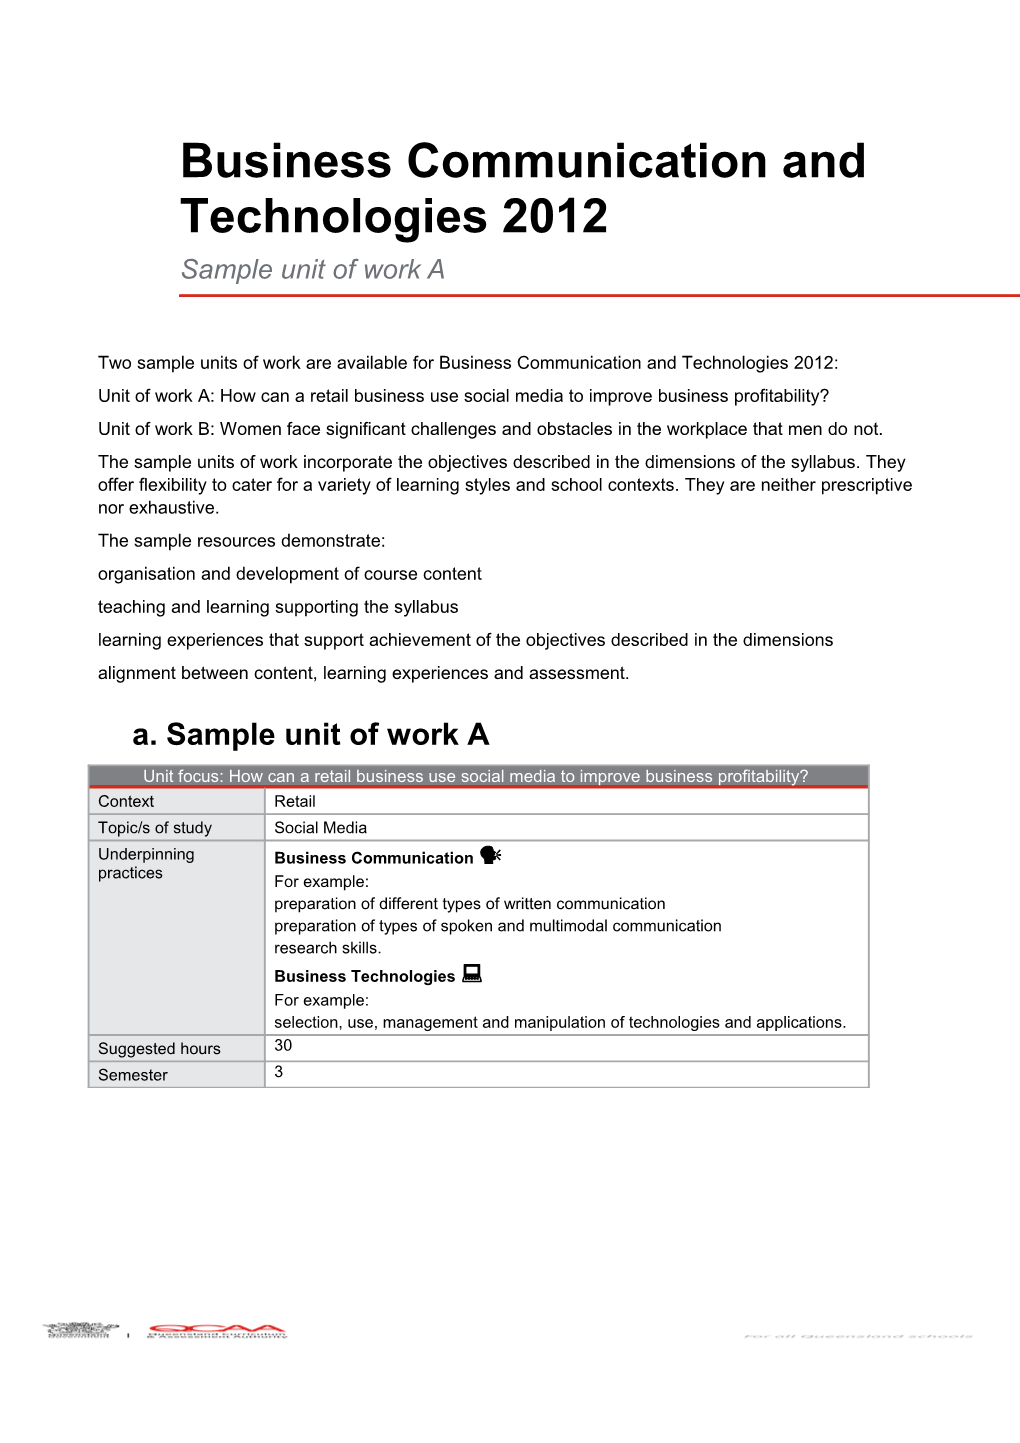 Sample Unit of Work a - Business Communication and Technologies 2012